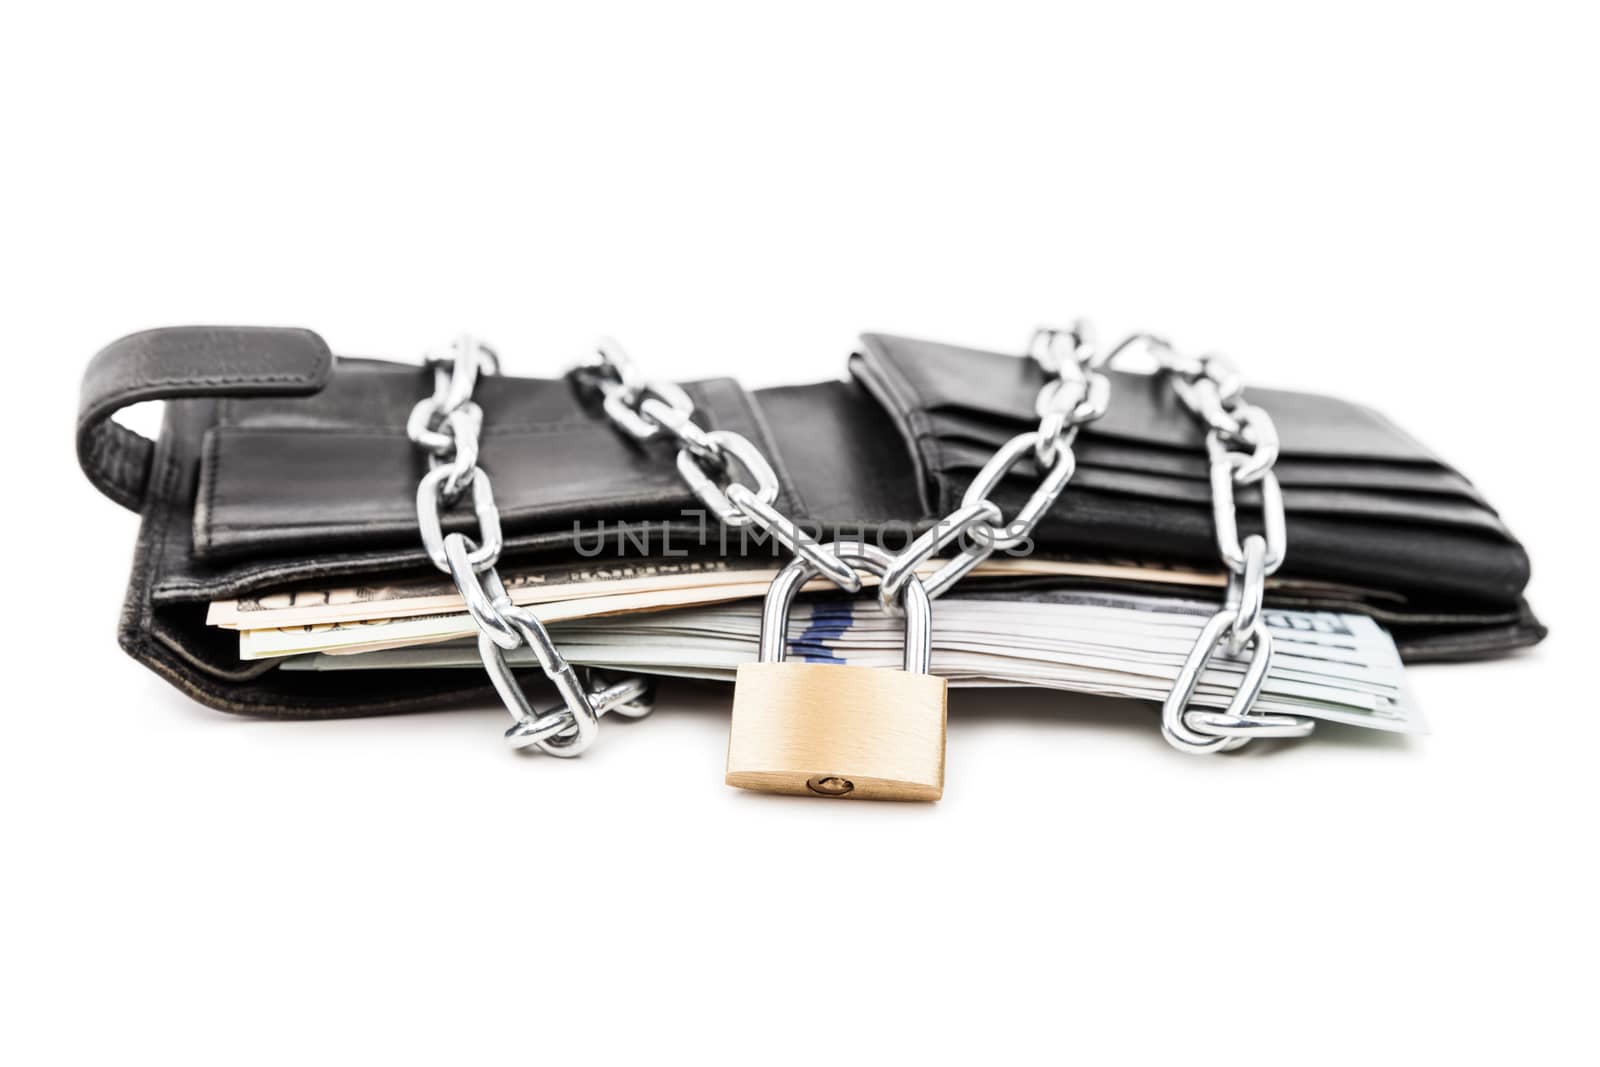 Chain padlock on leather wallet full of dollar currency money by ia_64